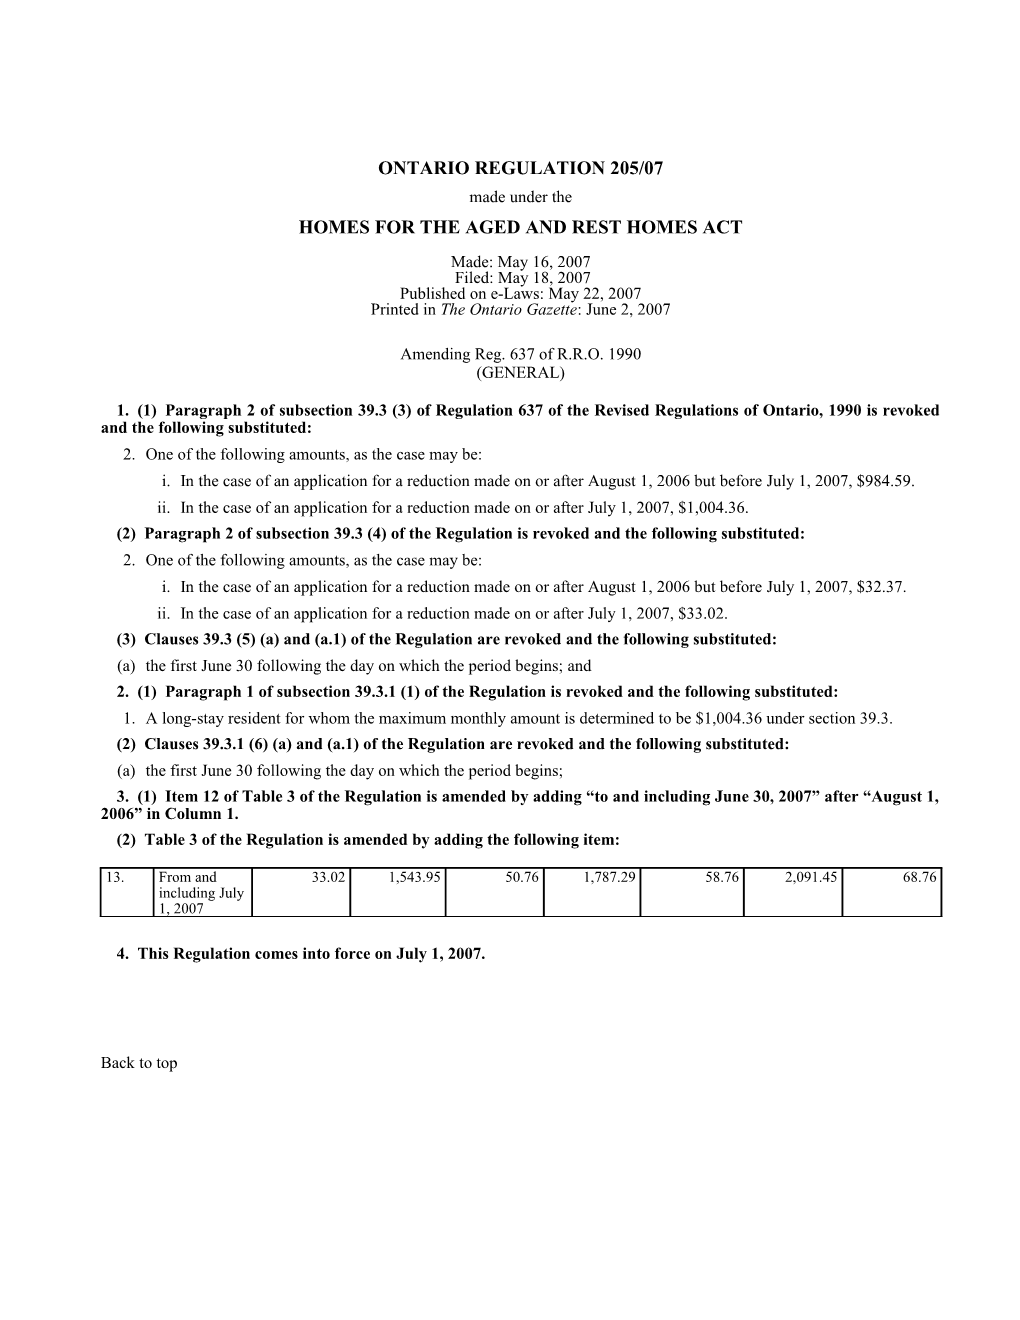 HOMES for the AGED and REST HOMES ACT - O. Reg. 205/07